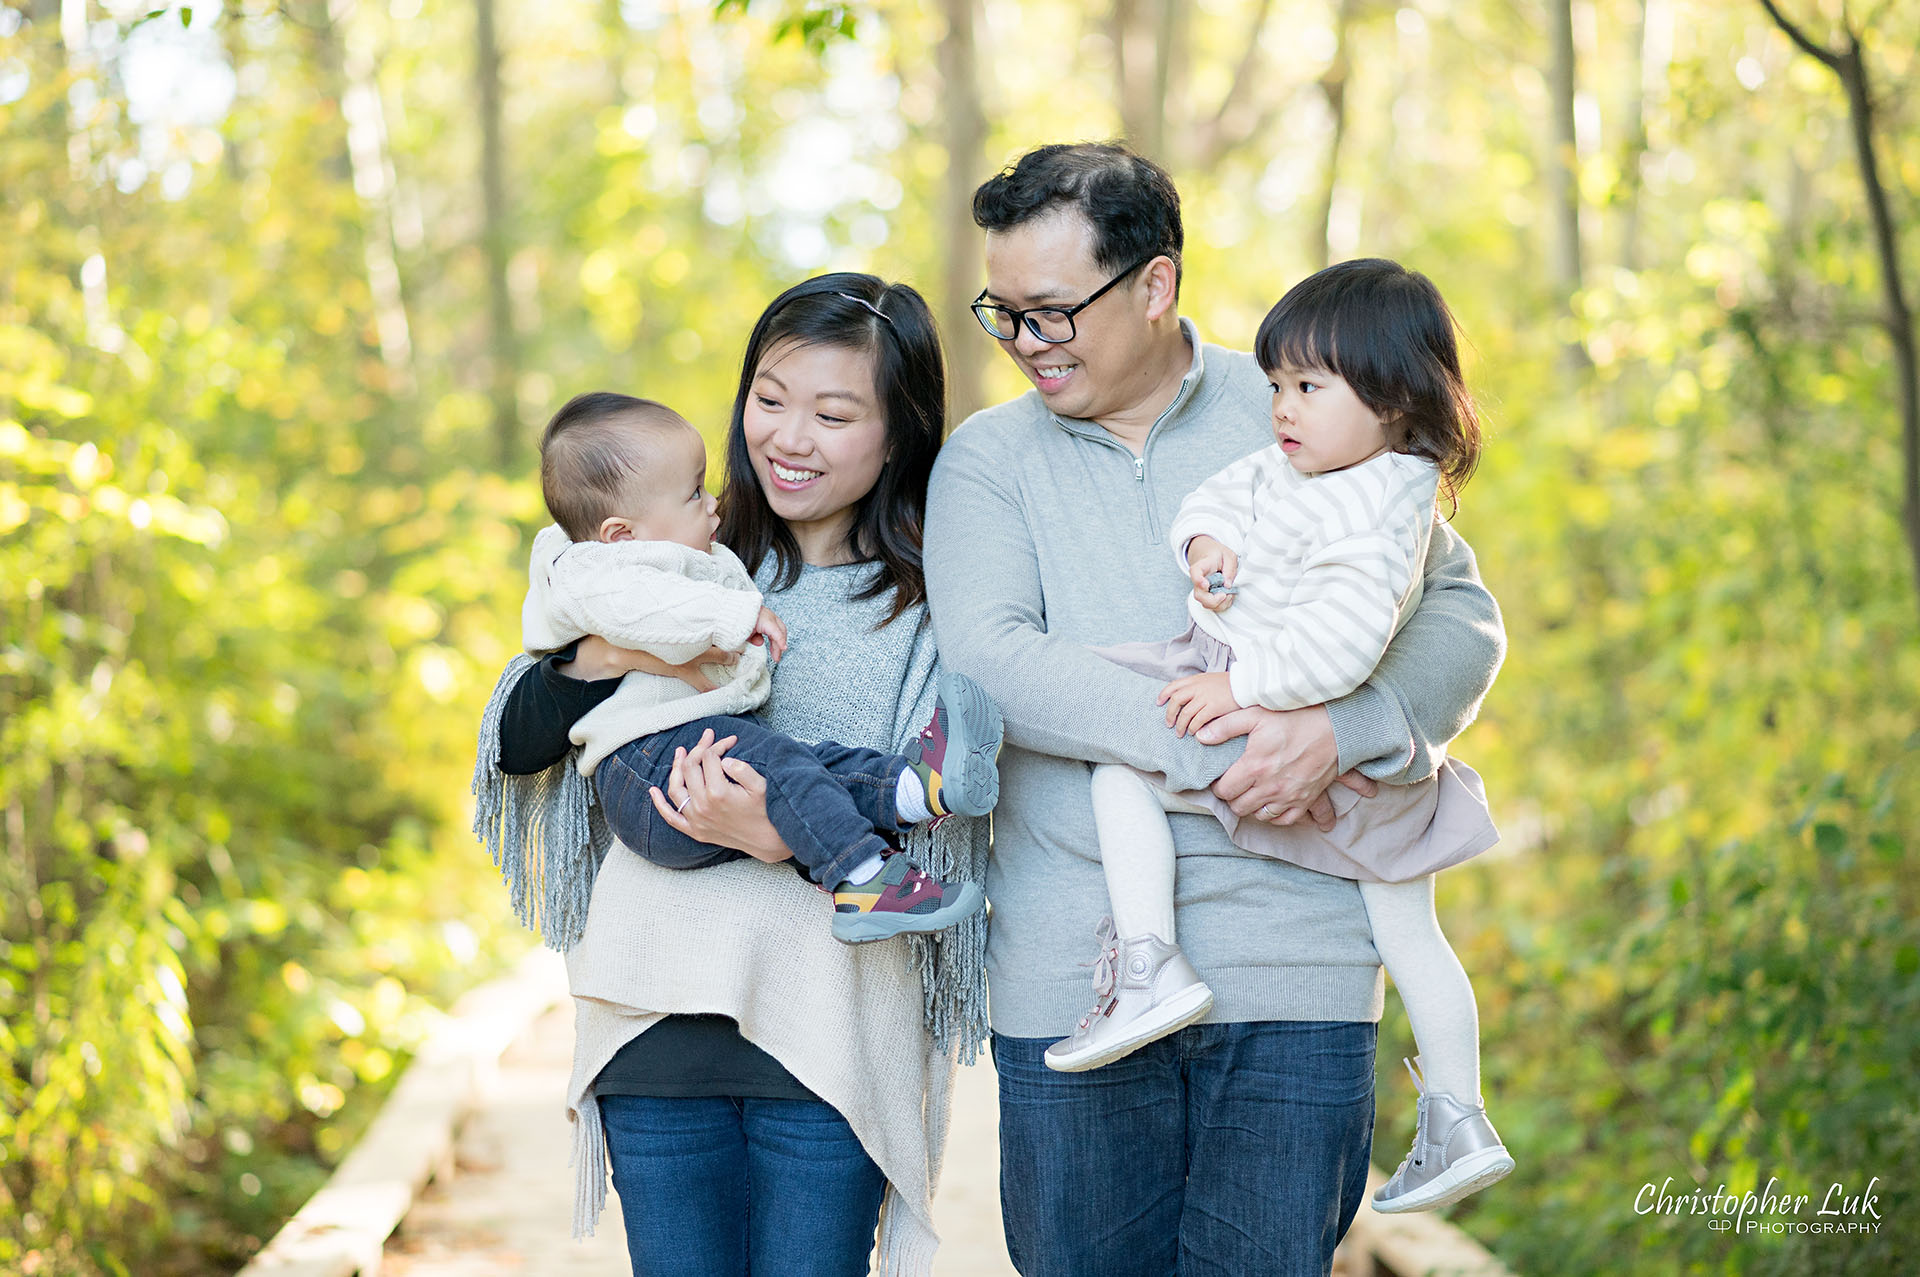 Christopher Luk Markham Family Photographer Autumn Leaves Fall Season Candid Photojournalistic Natural Bright Timeless Mother Father Son Daughter Smiling Detail